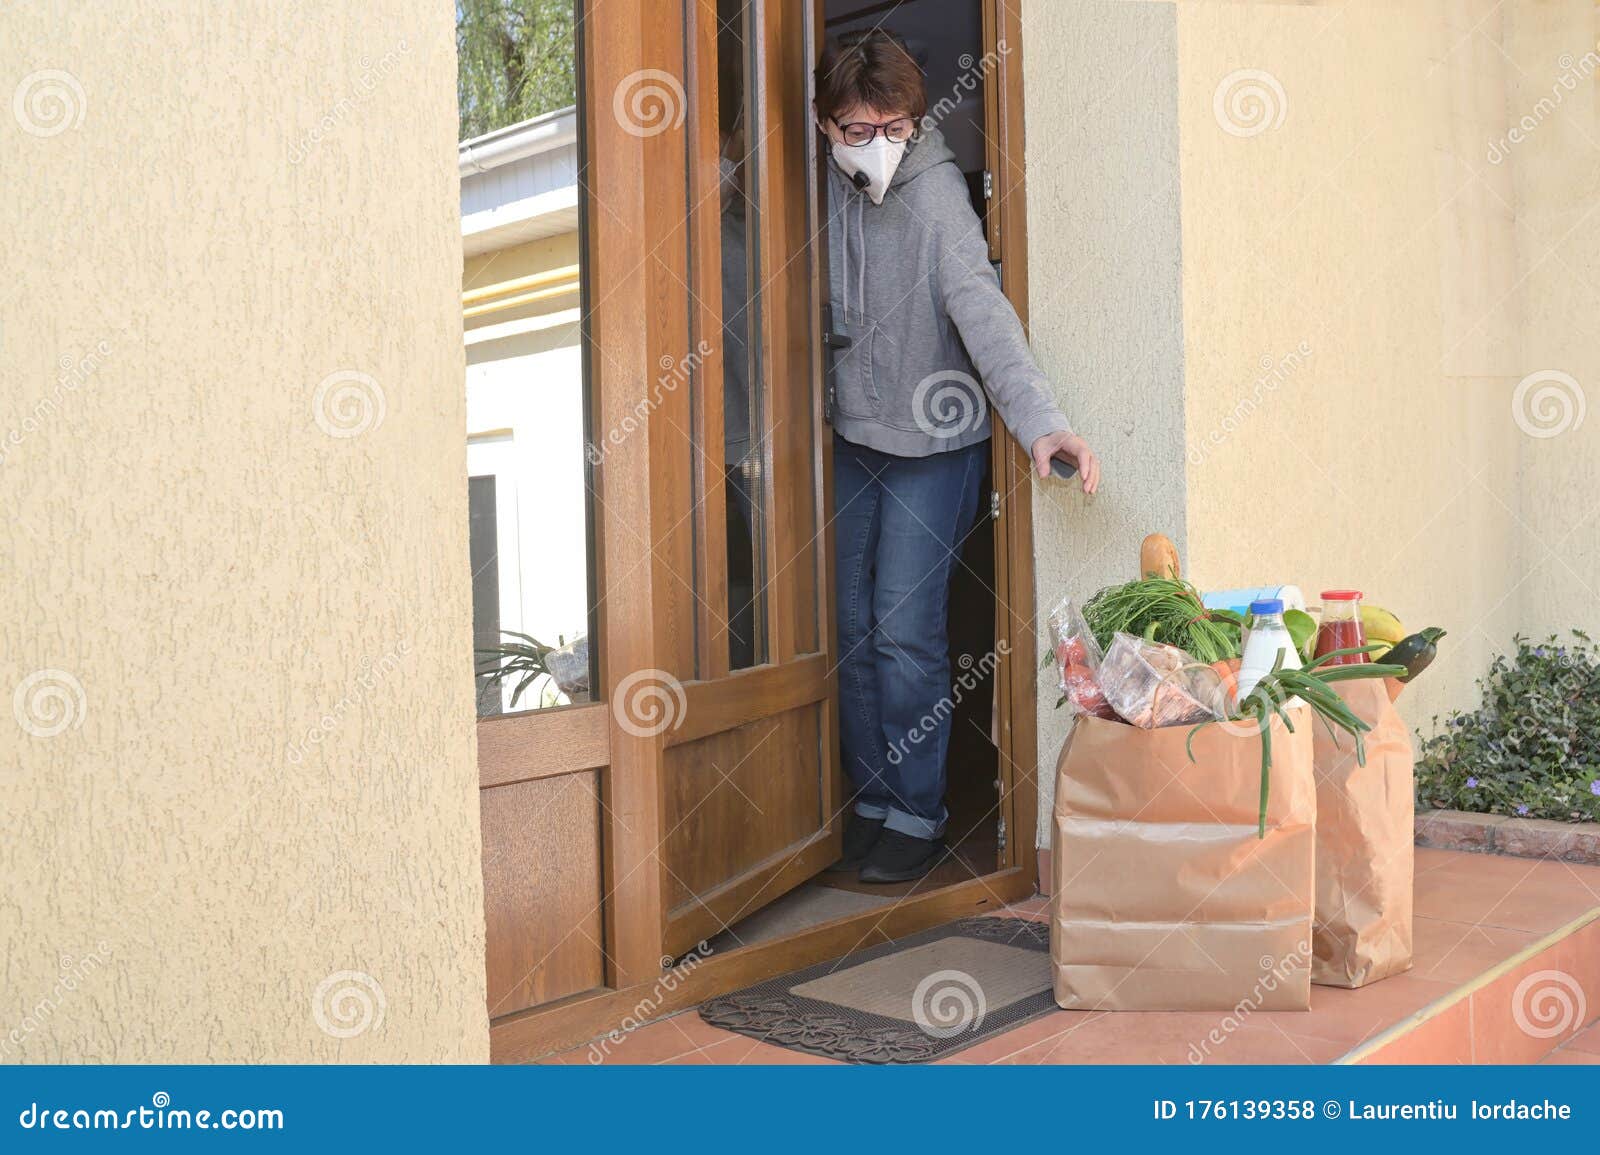 delivering food to a self-isolate woman or quarantine